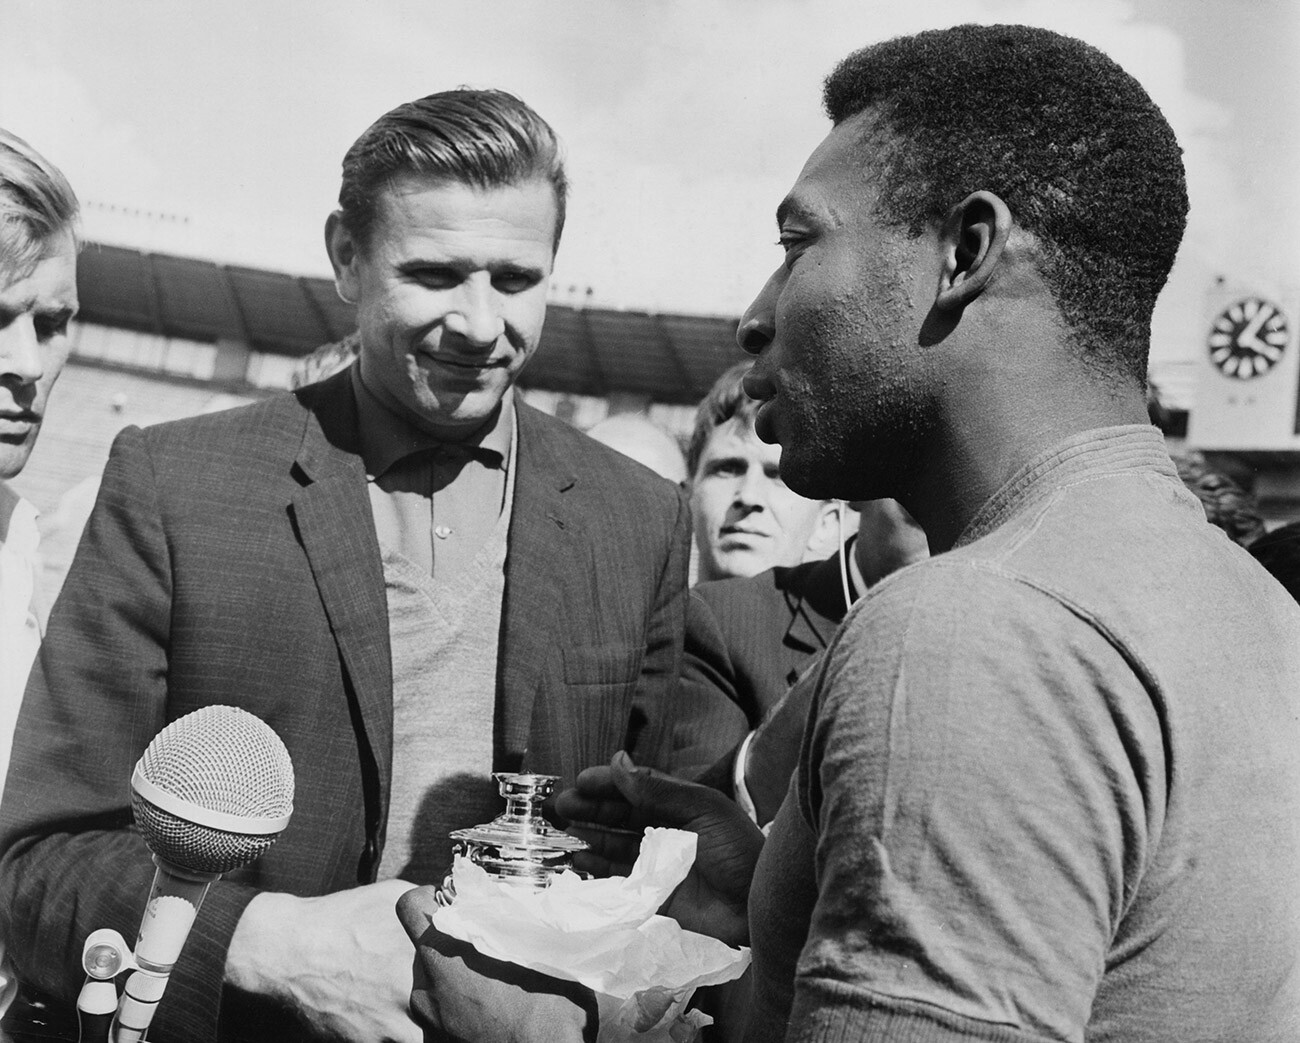 Lev Yashin presents a miniature samovar to Pelé before the the friendly match in Moscow, 1965.